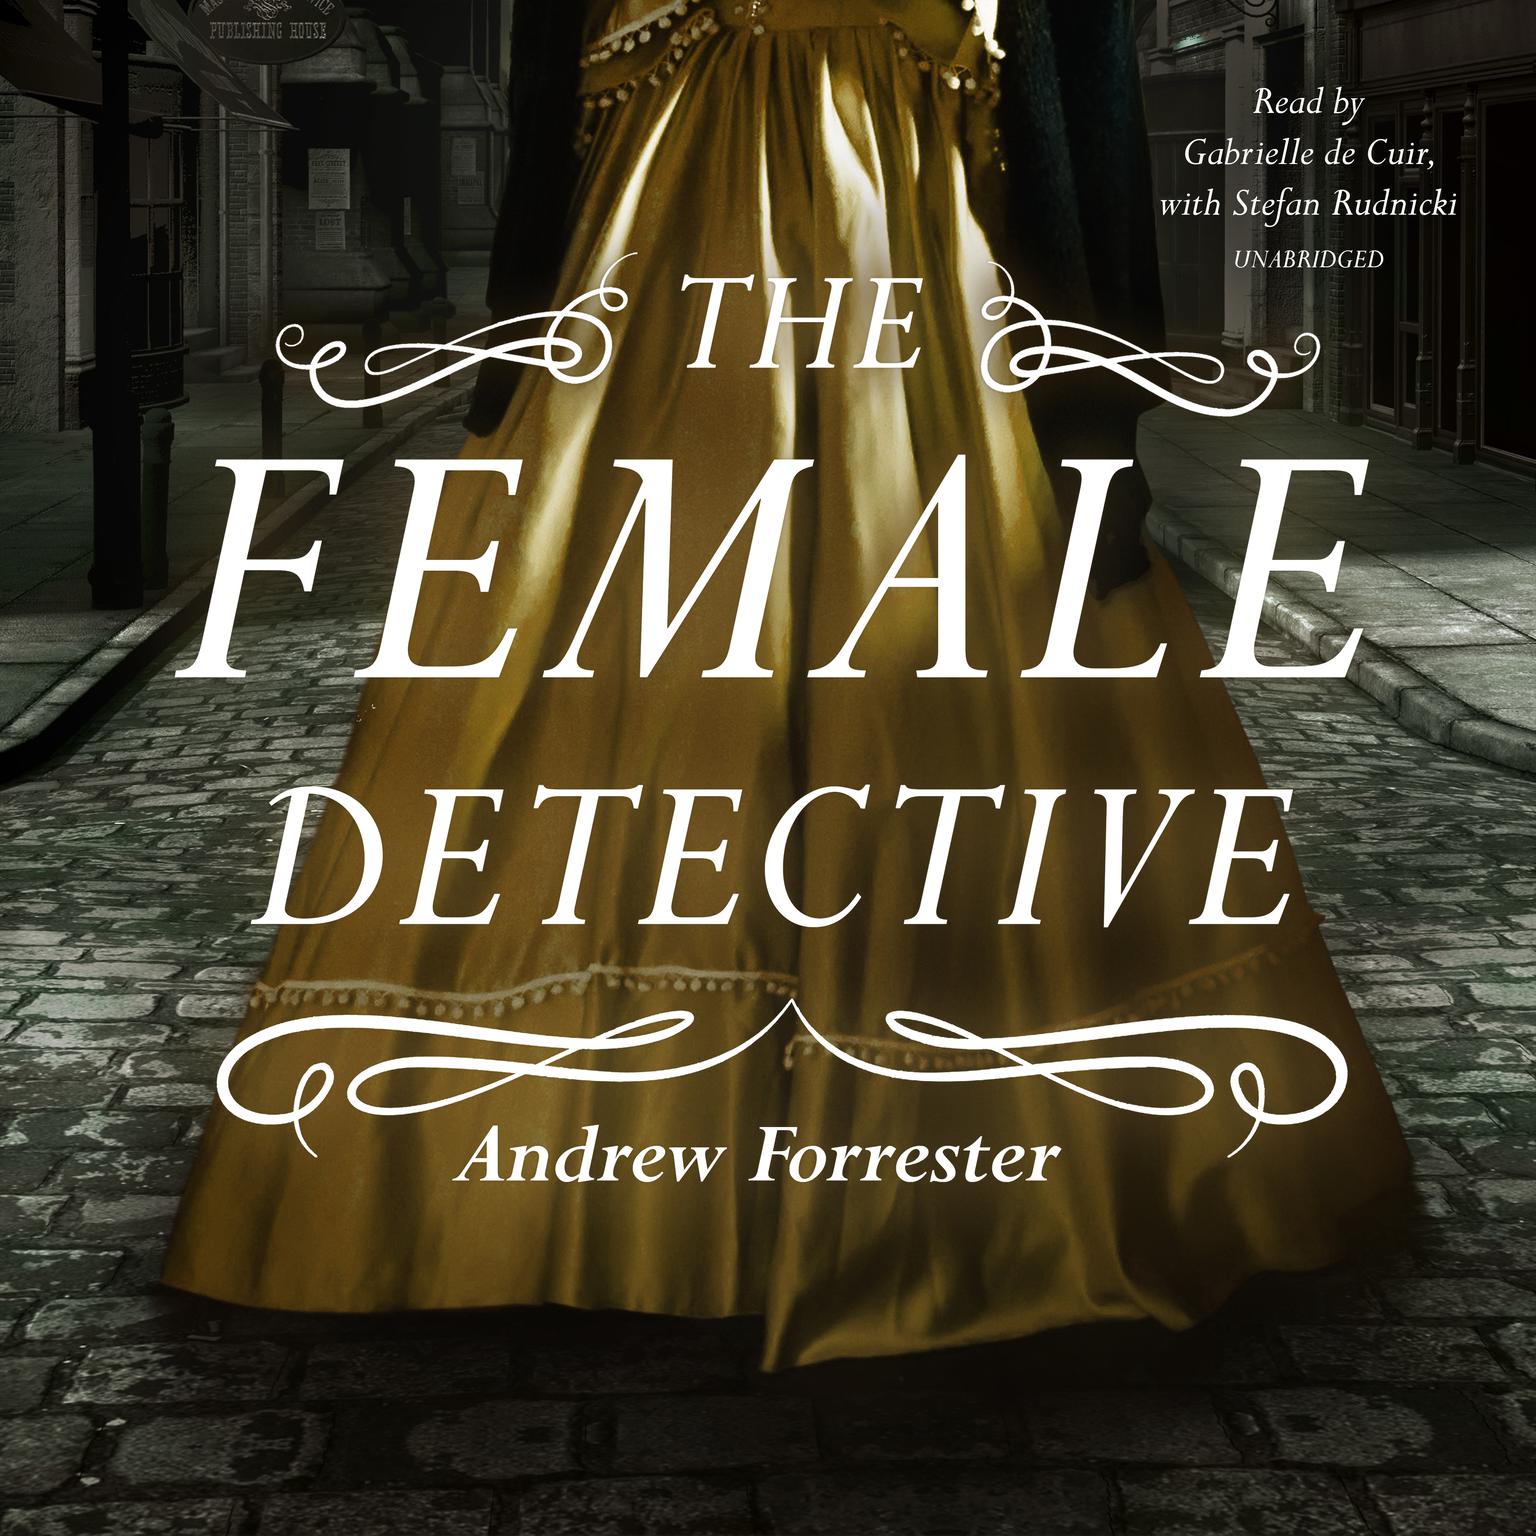 The Female Detective Audiobook, by Andrew Forrester